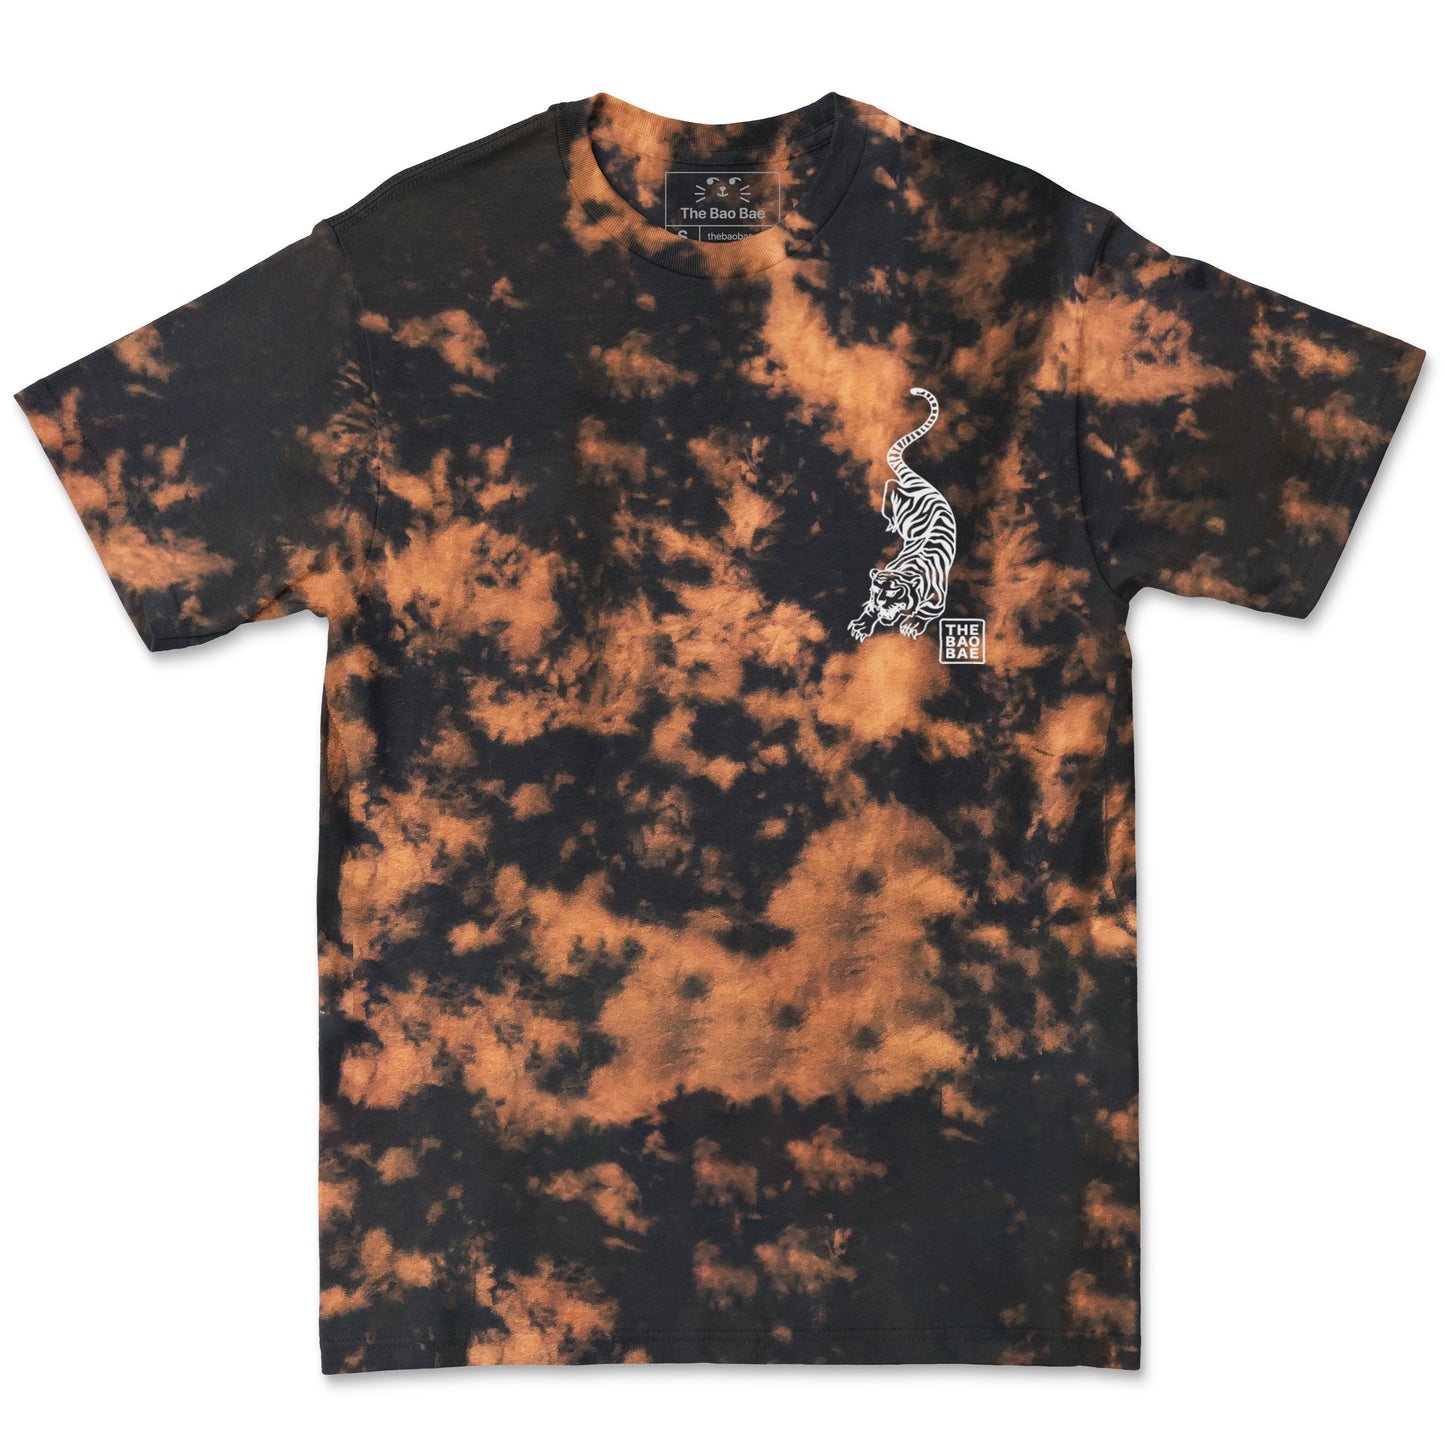 Tiger Balm Makes Everything Better T-Shirt Tie Dye